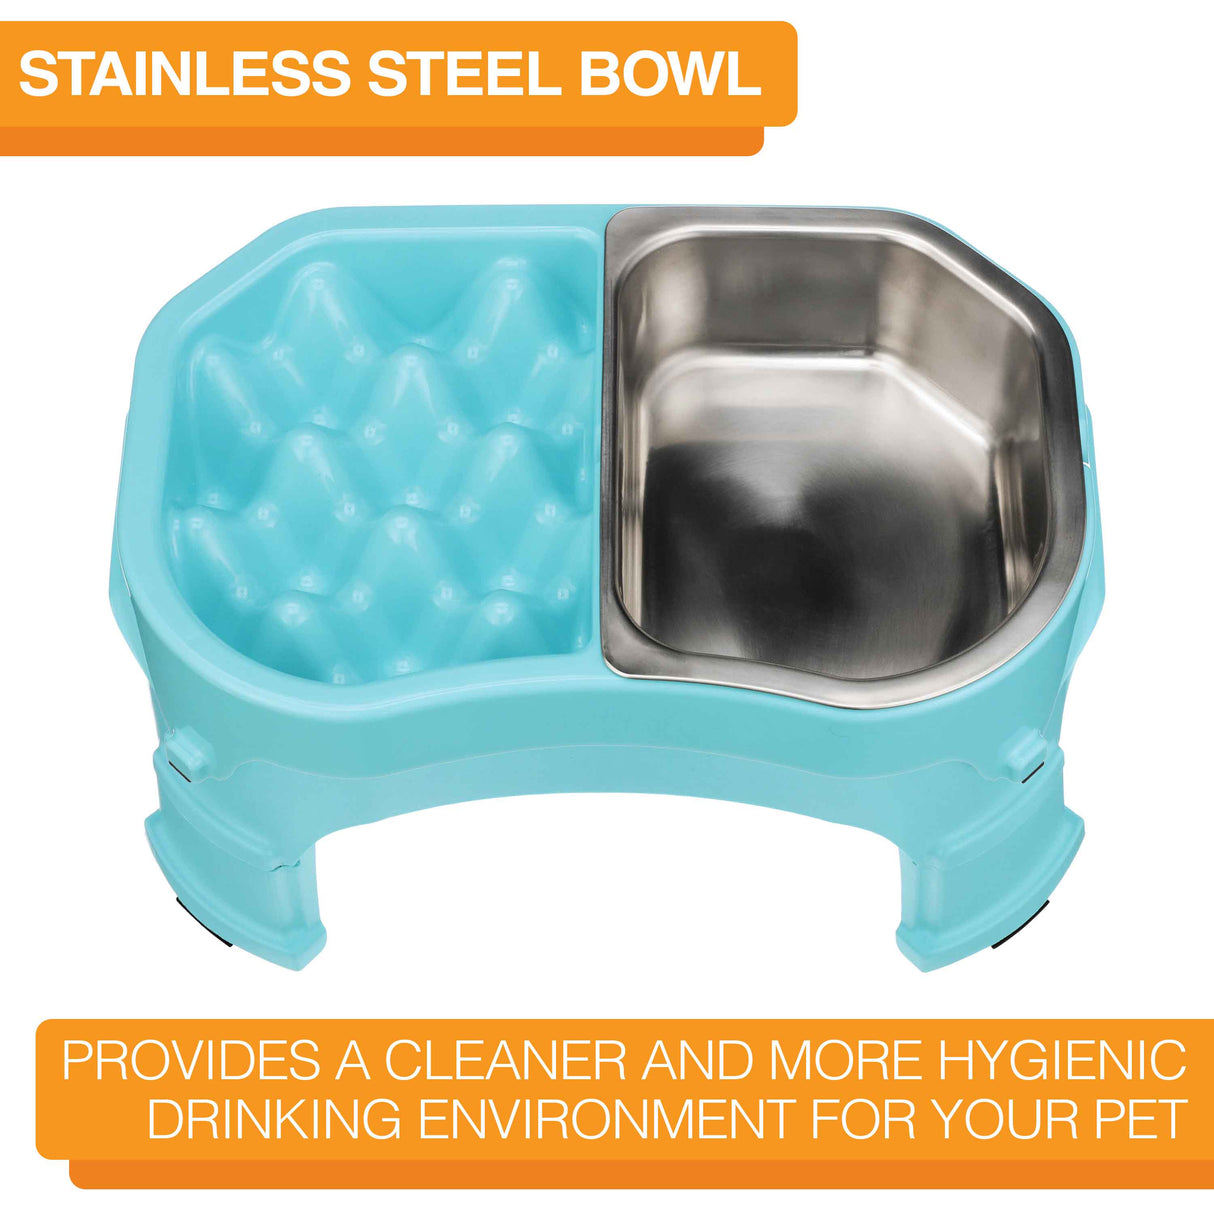 The Double Diner with the stainless steel insert is more hygienic 